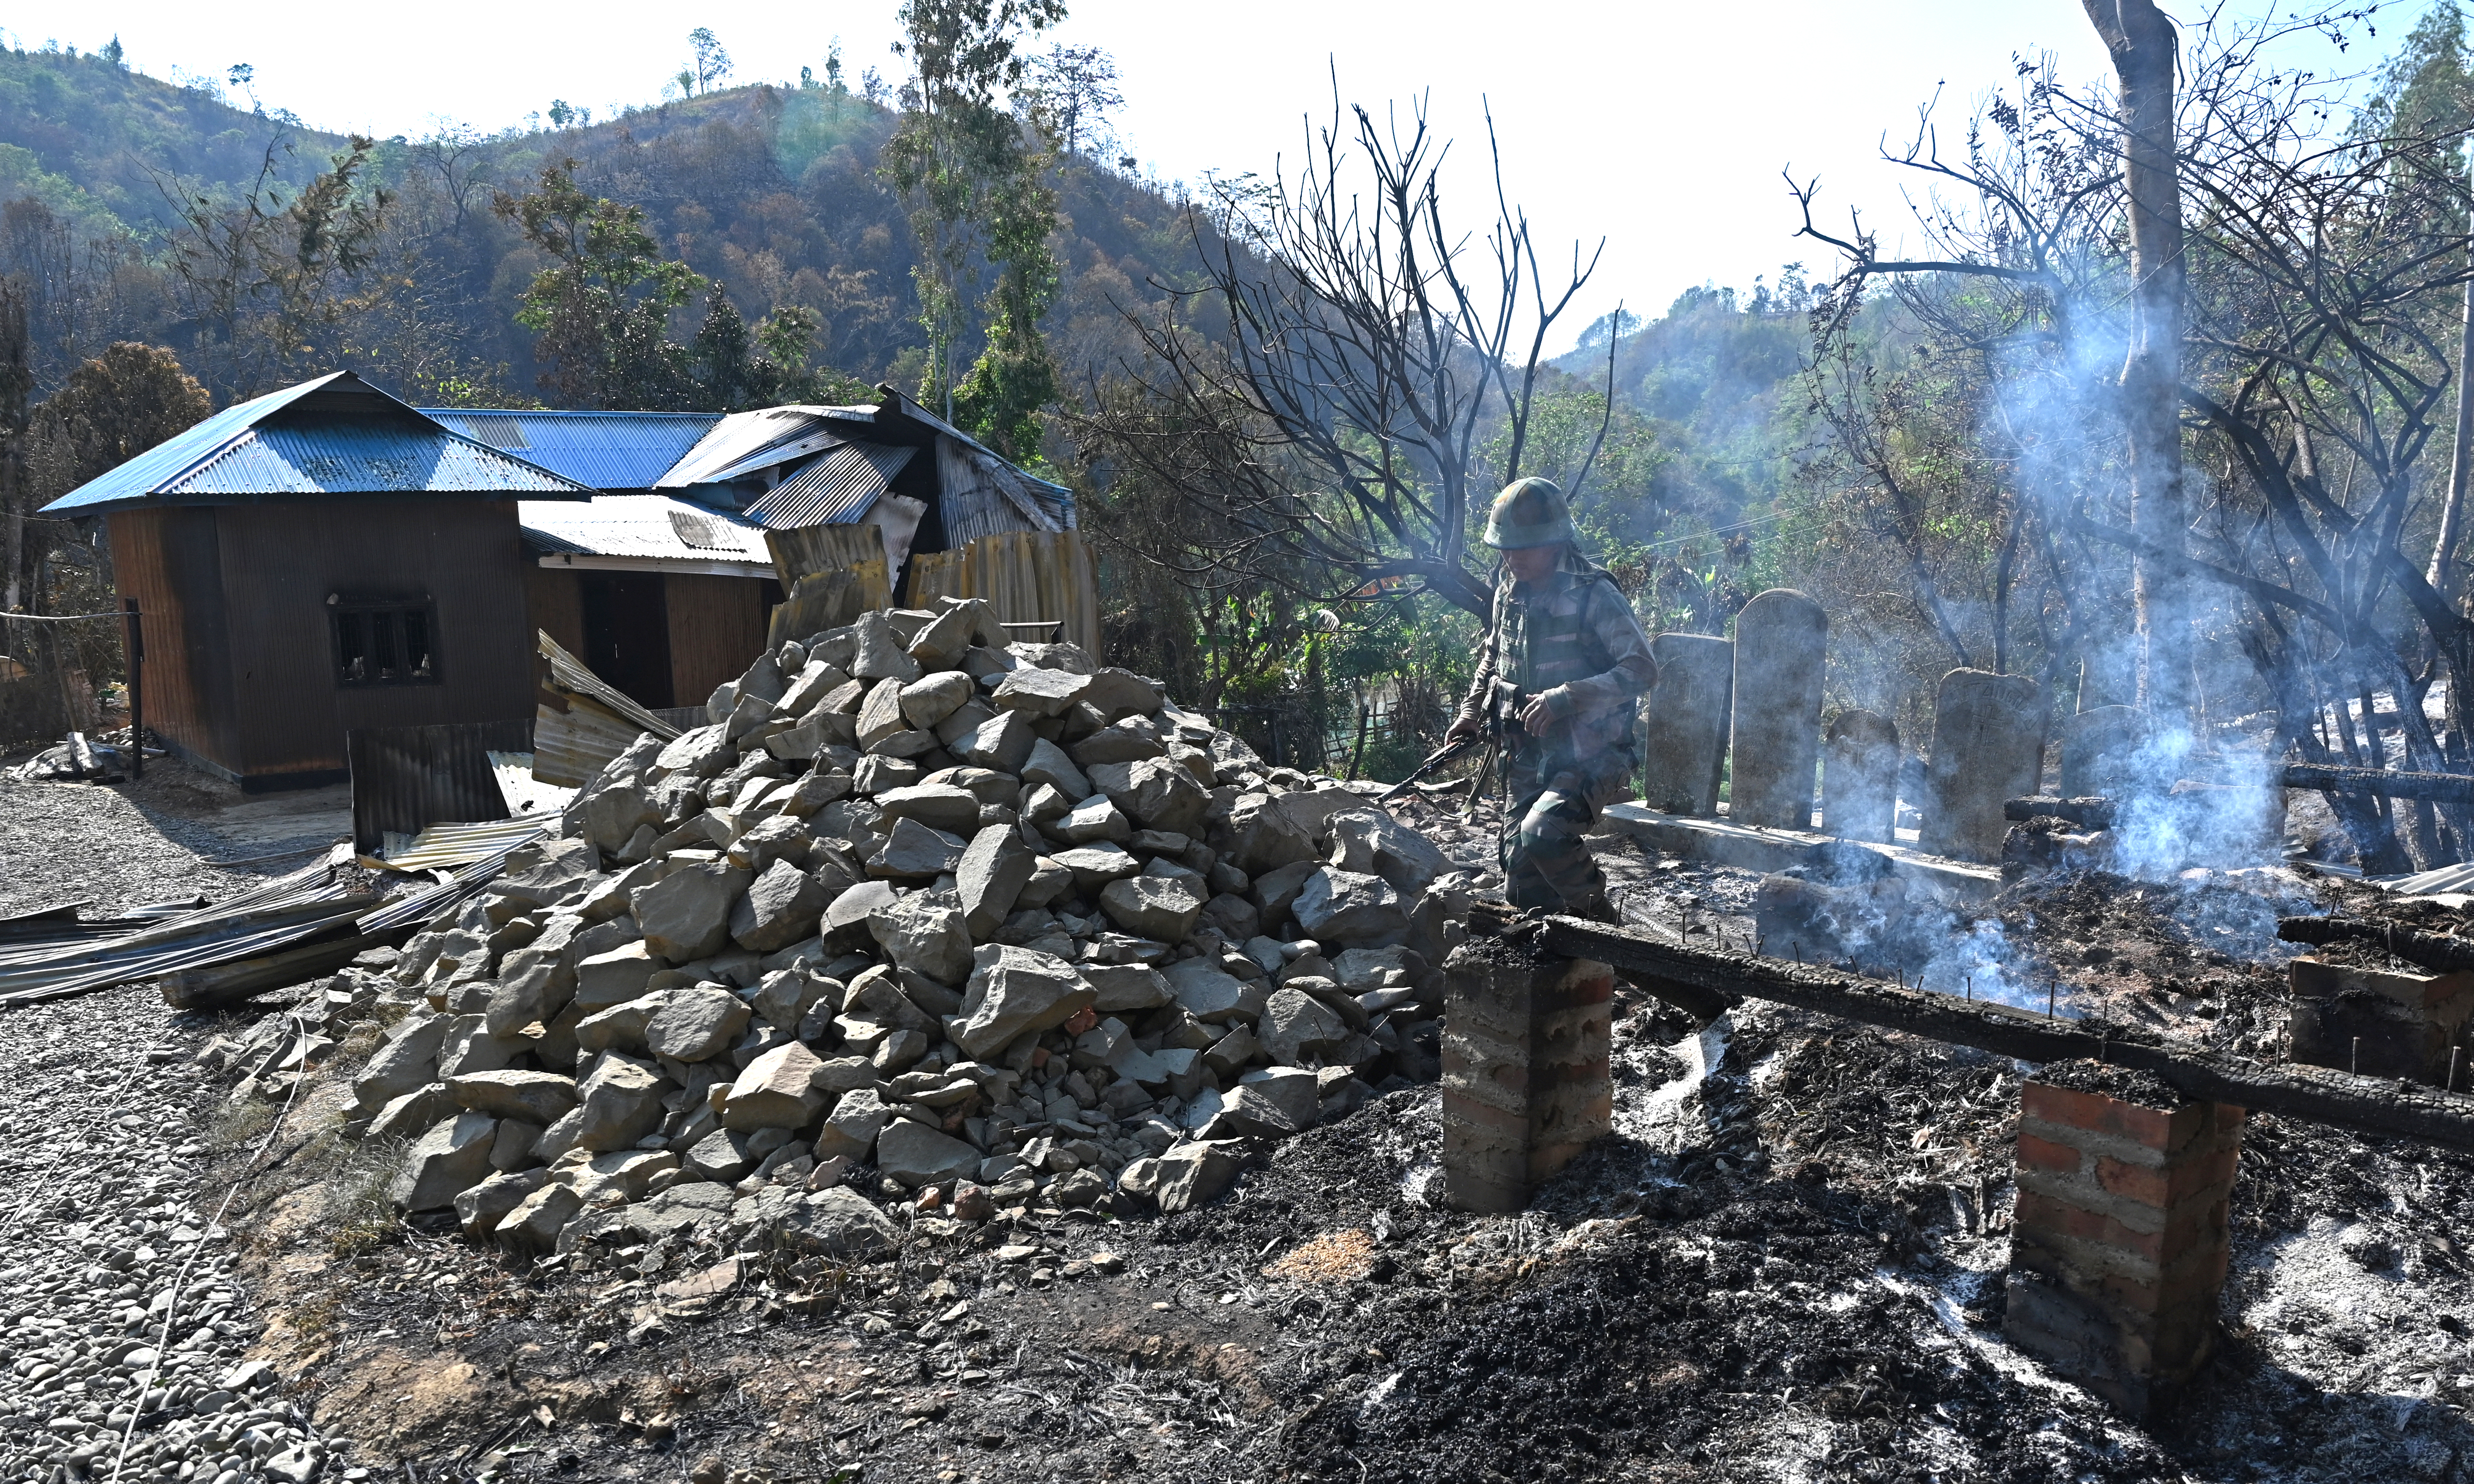 SENAPATI: An Indian army soldier inspects the remains of a house that was set on fire by a mob in the ethnic violence hit area of Heiroklian village in Senapati district, in India's Manipur state. – AFP